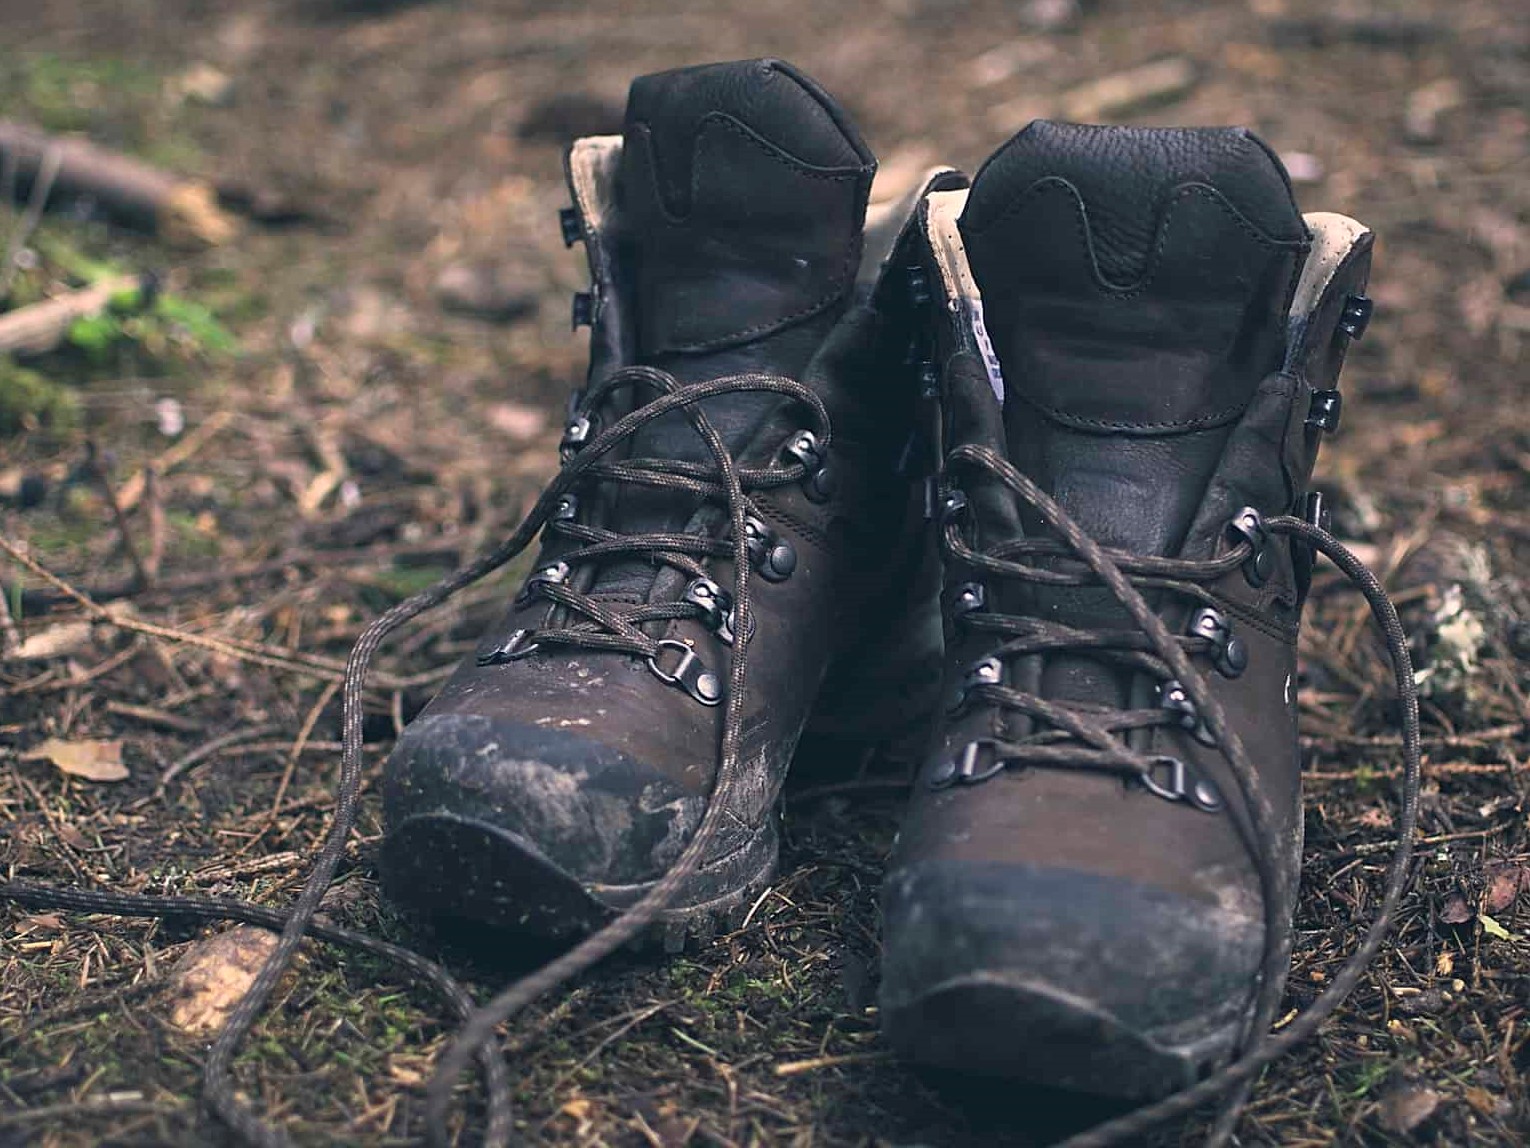 How To Dry Hiking Boots